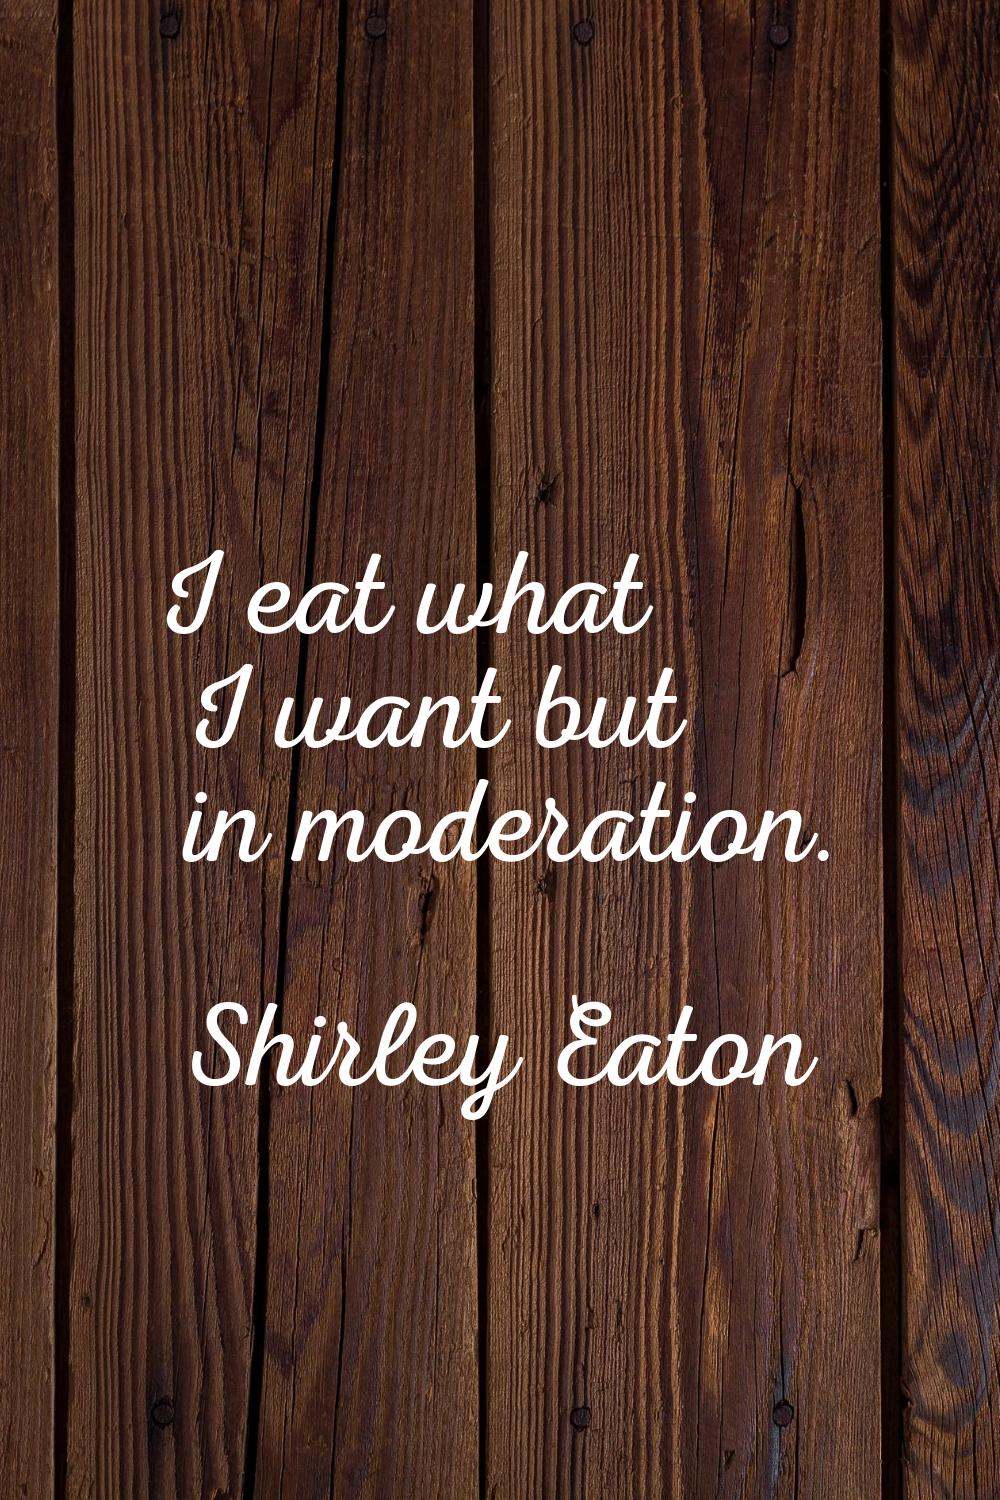 I eat what I want but in moderation.